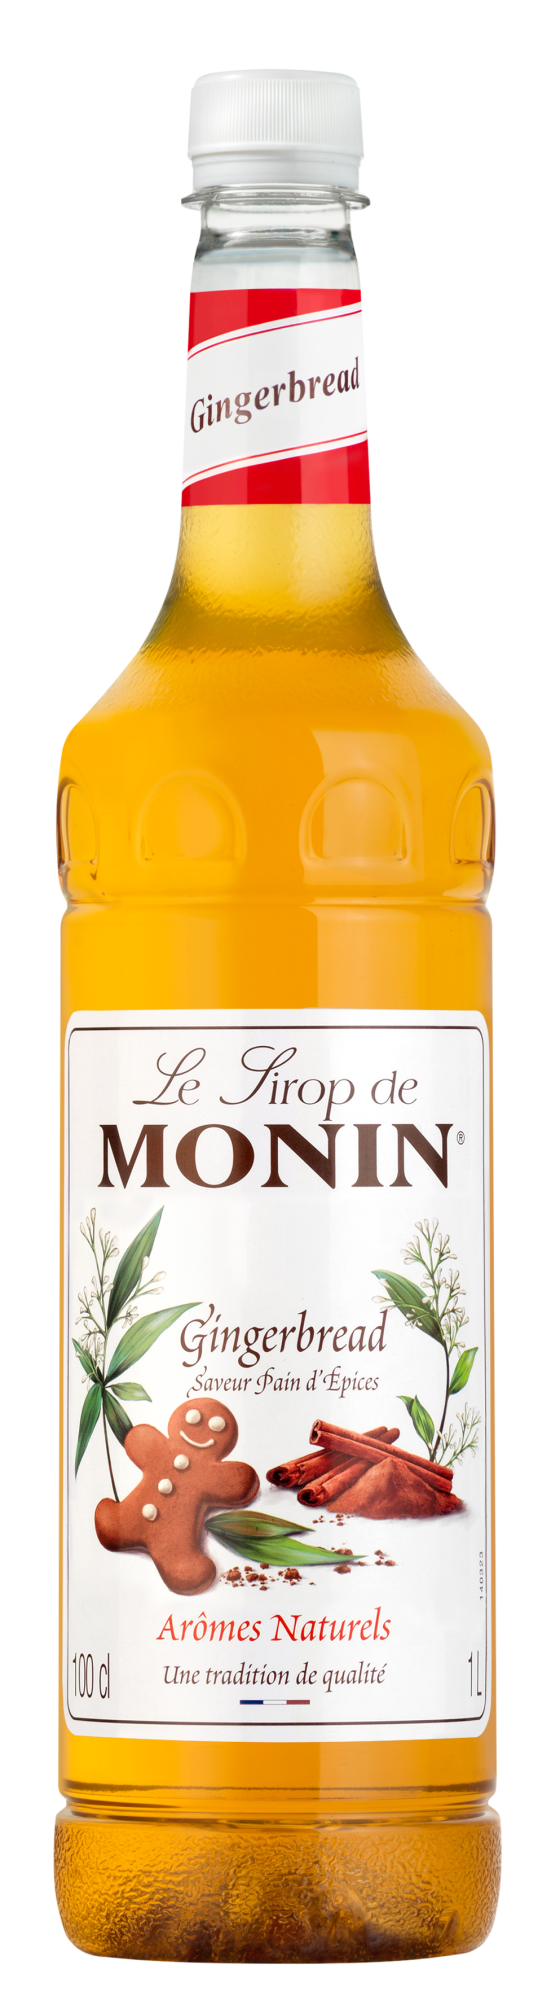 Buy MONIN Gingerbread syrup. It captures the spicy, warming notes we all have become accustomed to during the festive period.